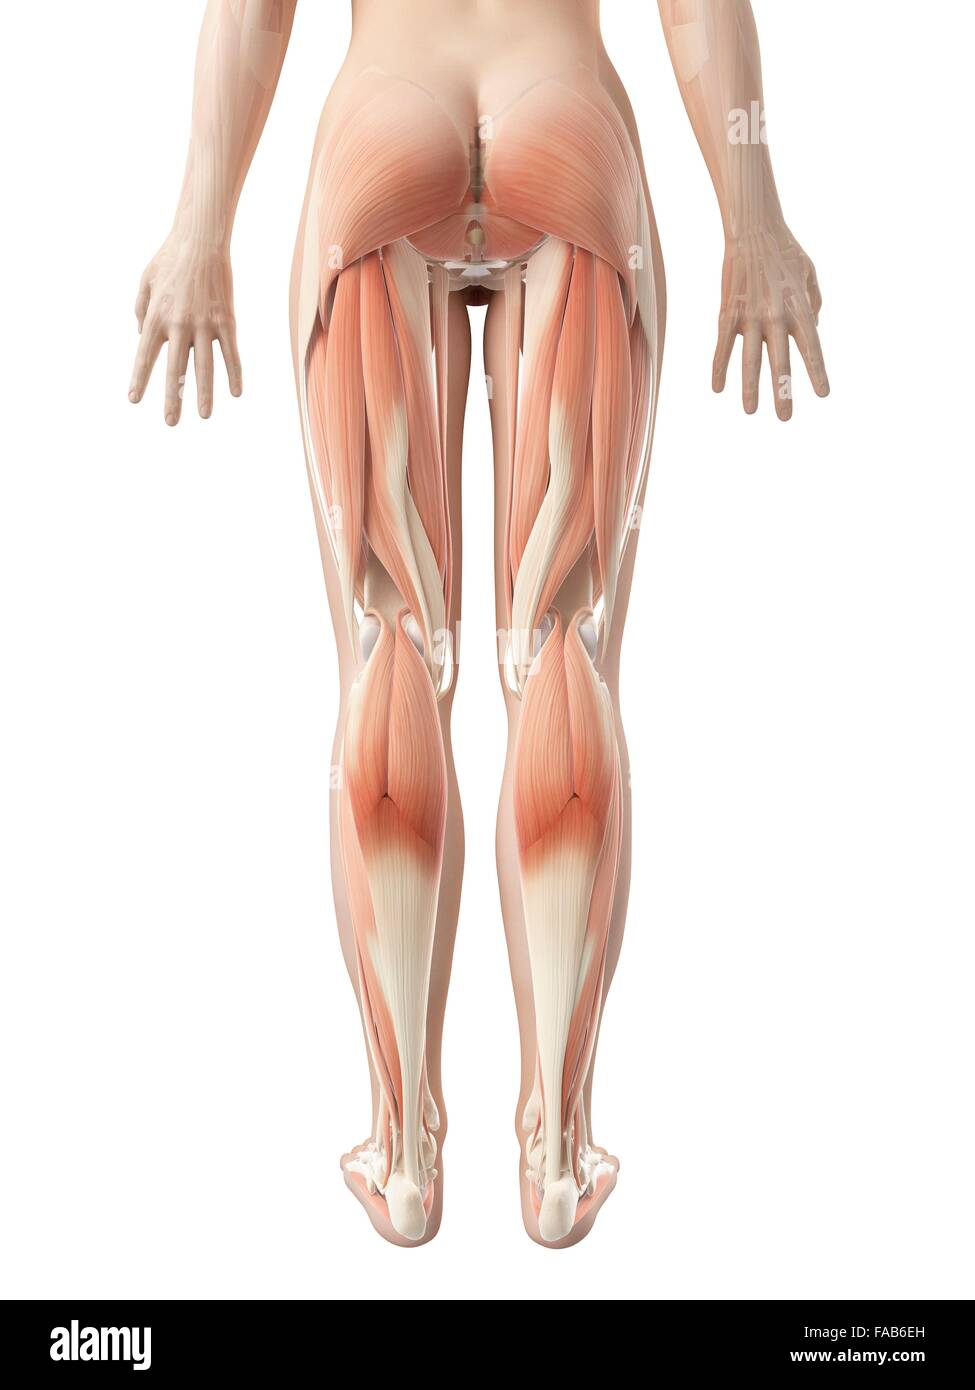 Muscular system of the legs, computer illustration. Stock Photo